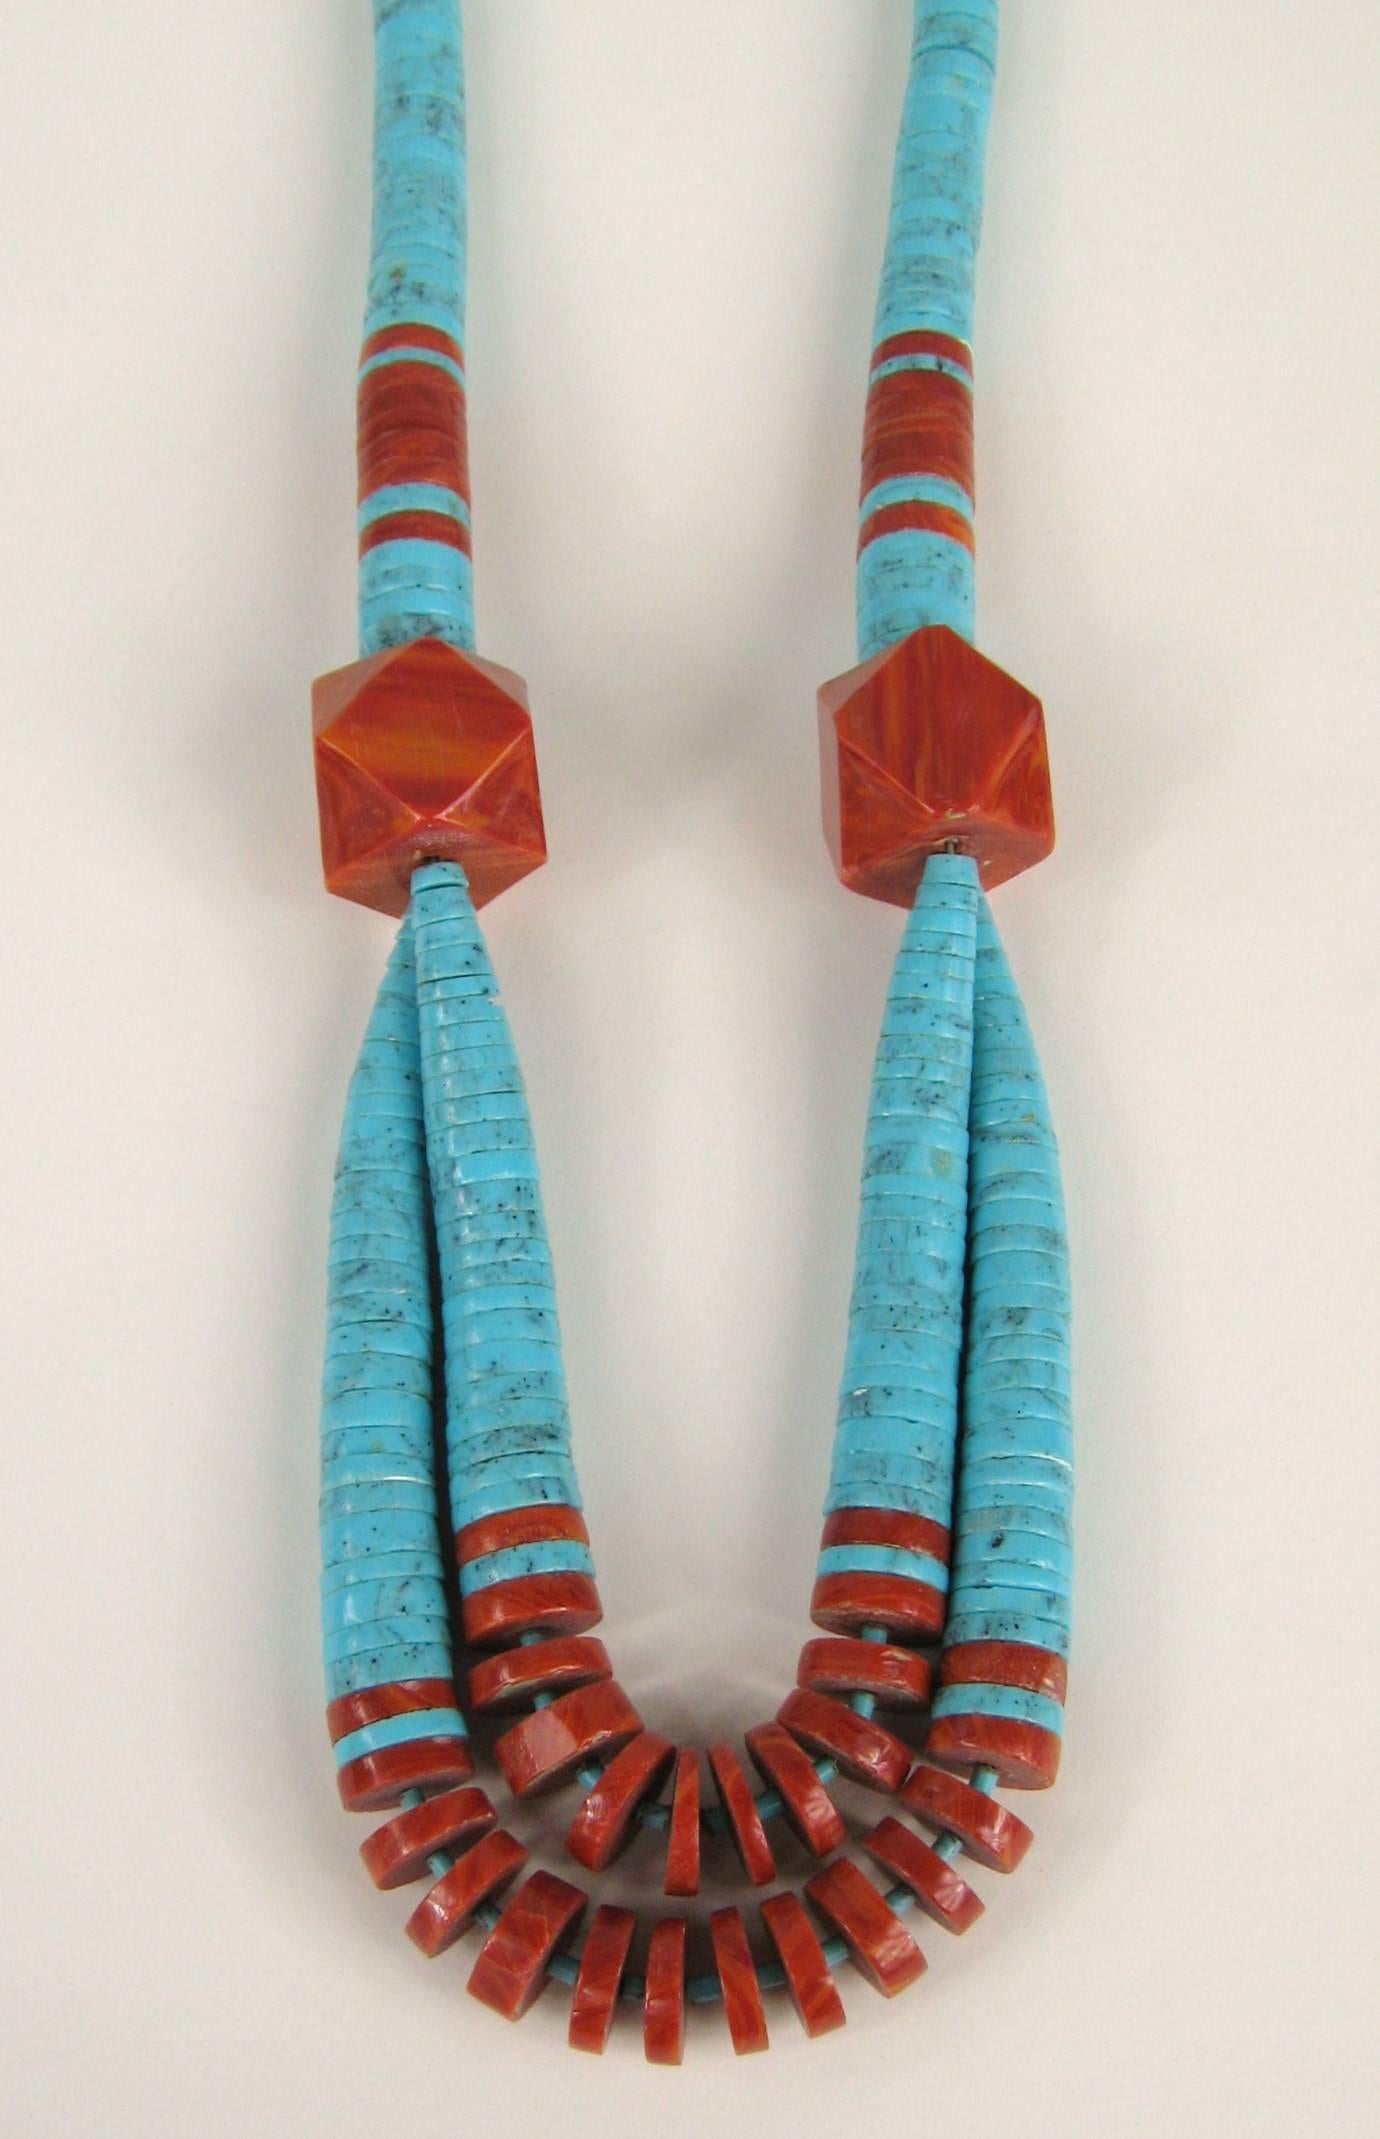 Double strand at the bottom on this statement Necklace. Large Turquoise discs graduating in size from 14. mm down to 7.75mm. Huge 25mm Spiny Oyster beads accent the turquoise. This large, bold and dramatic necklace from Santo Domingo Pueblo in New